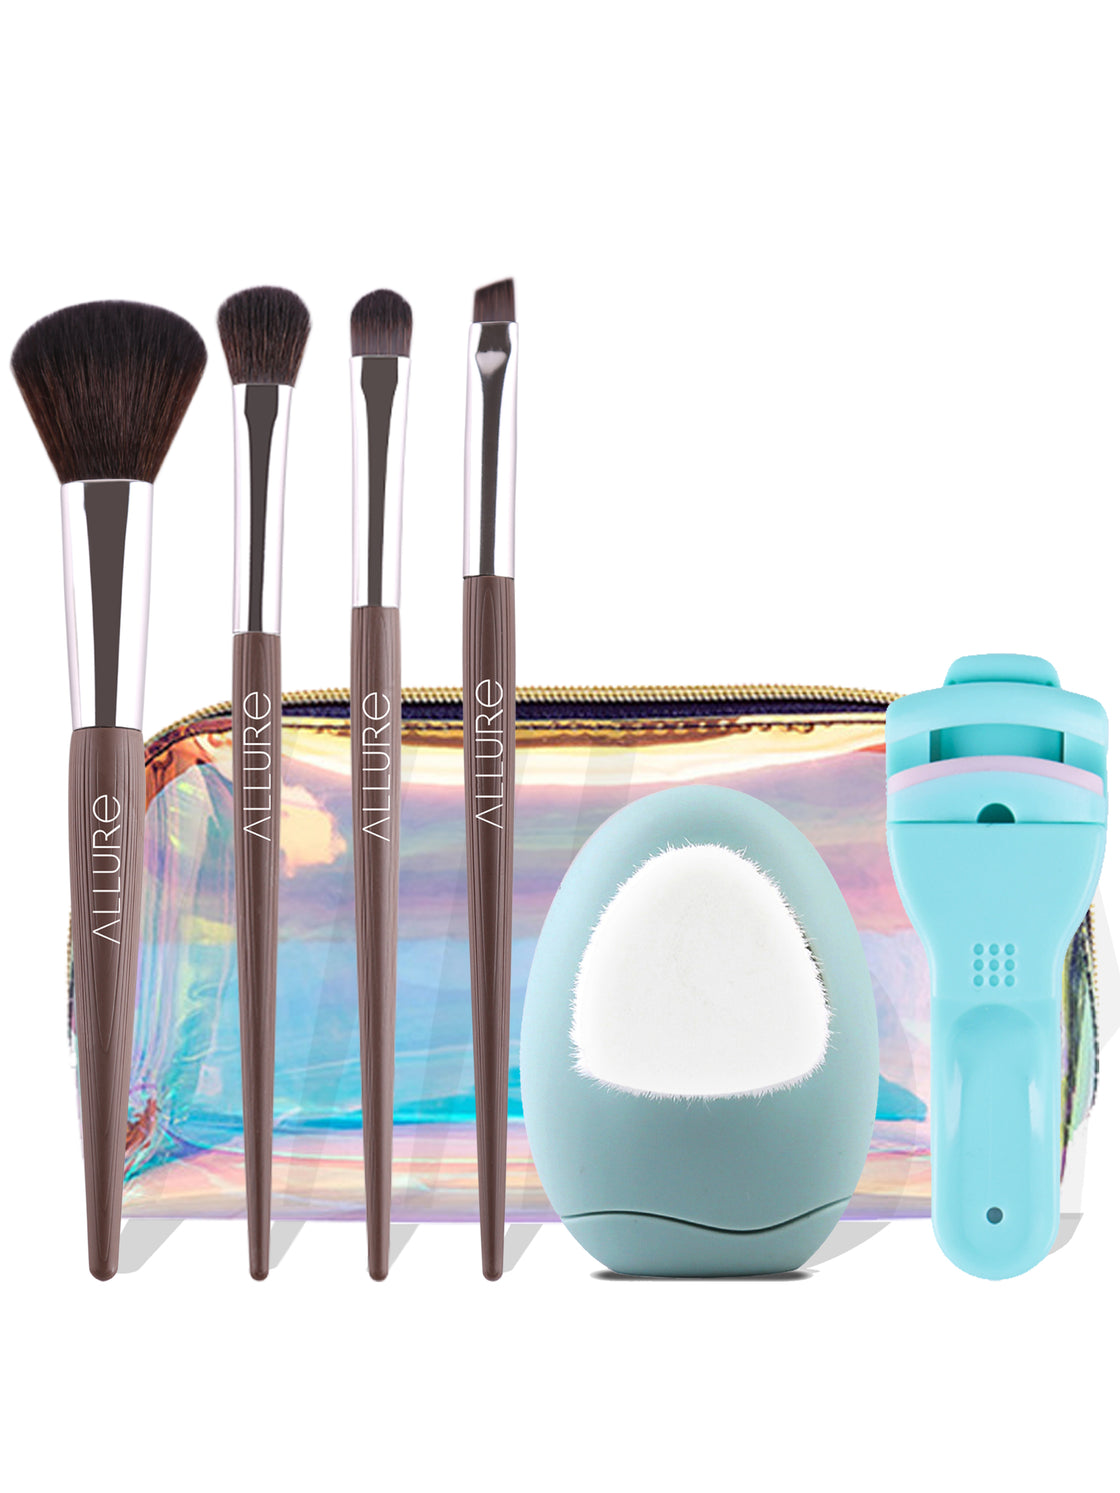 Rakhi Gift Combo Consisting Of 4 Ps Brush Set With Eyelash Curler, Face Cleanser & A Holographic Bag-6